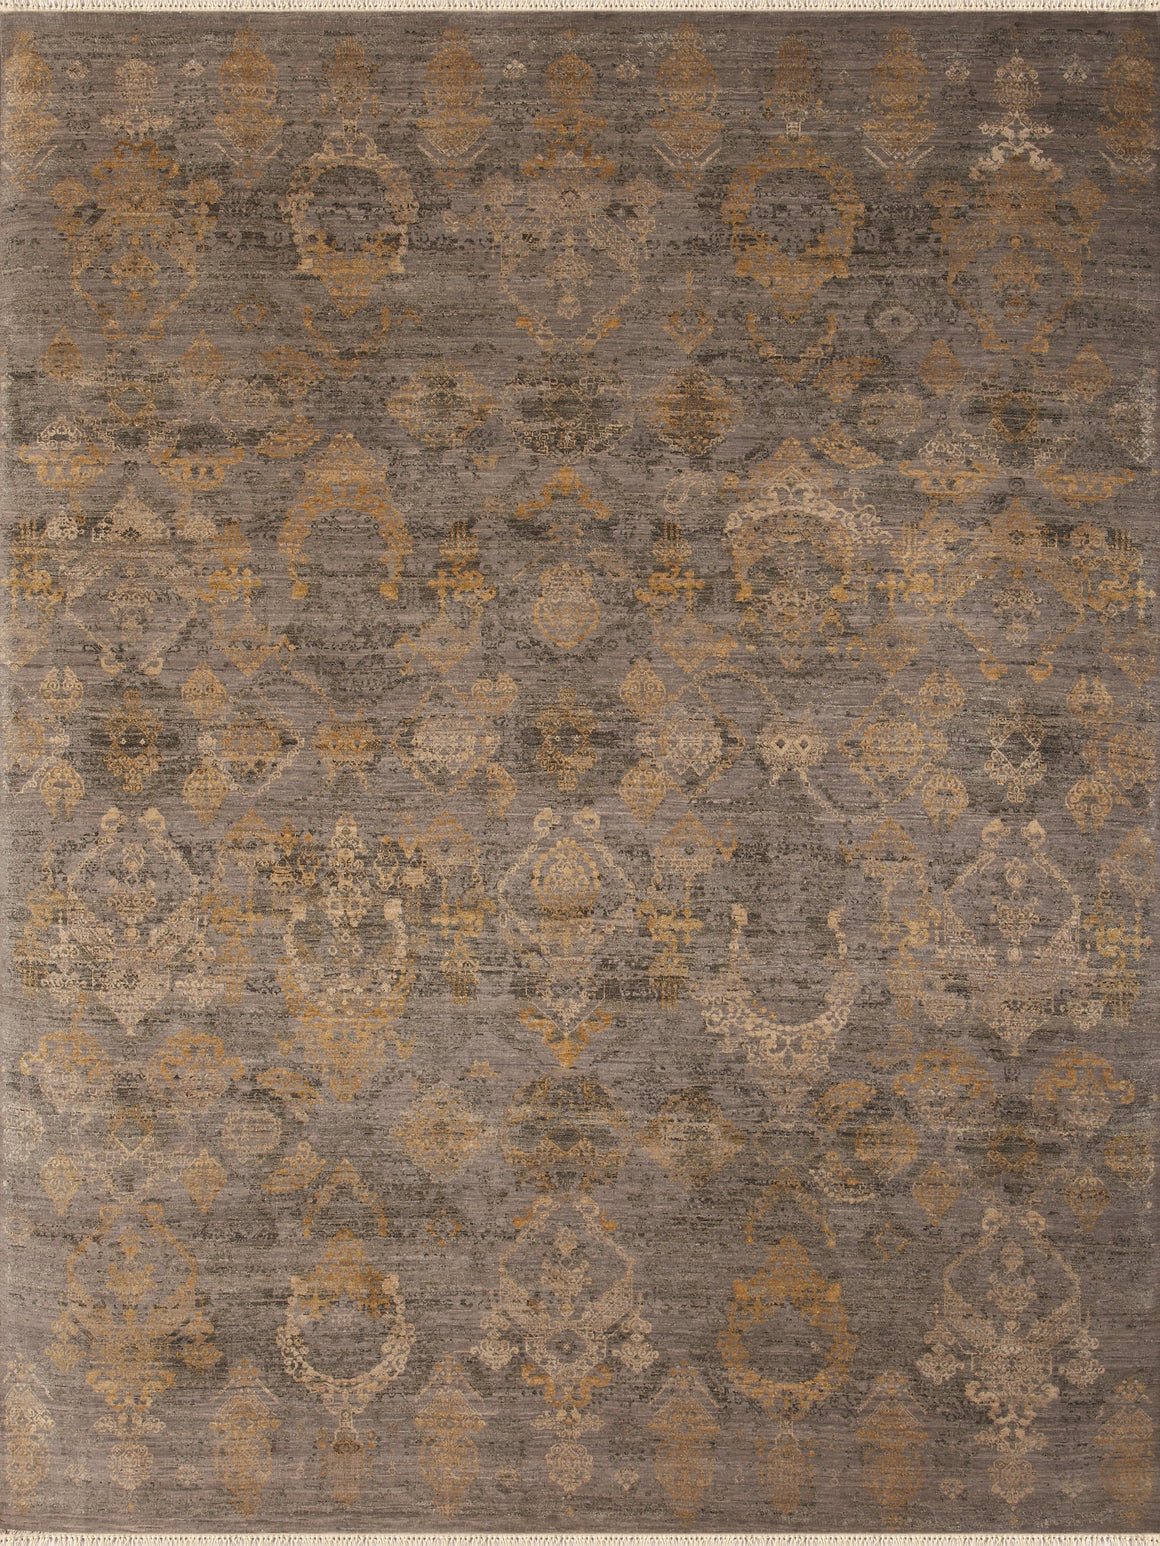 Hoeft Transitional Design Hand Knotted Rug 9'x12'